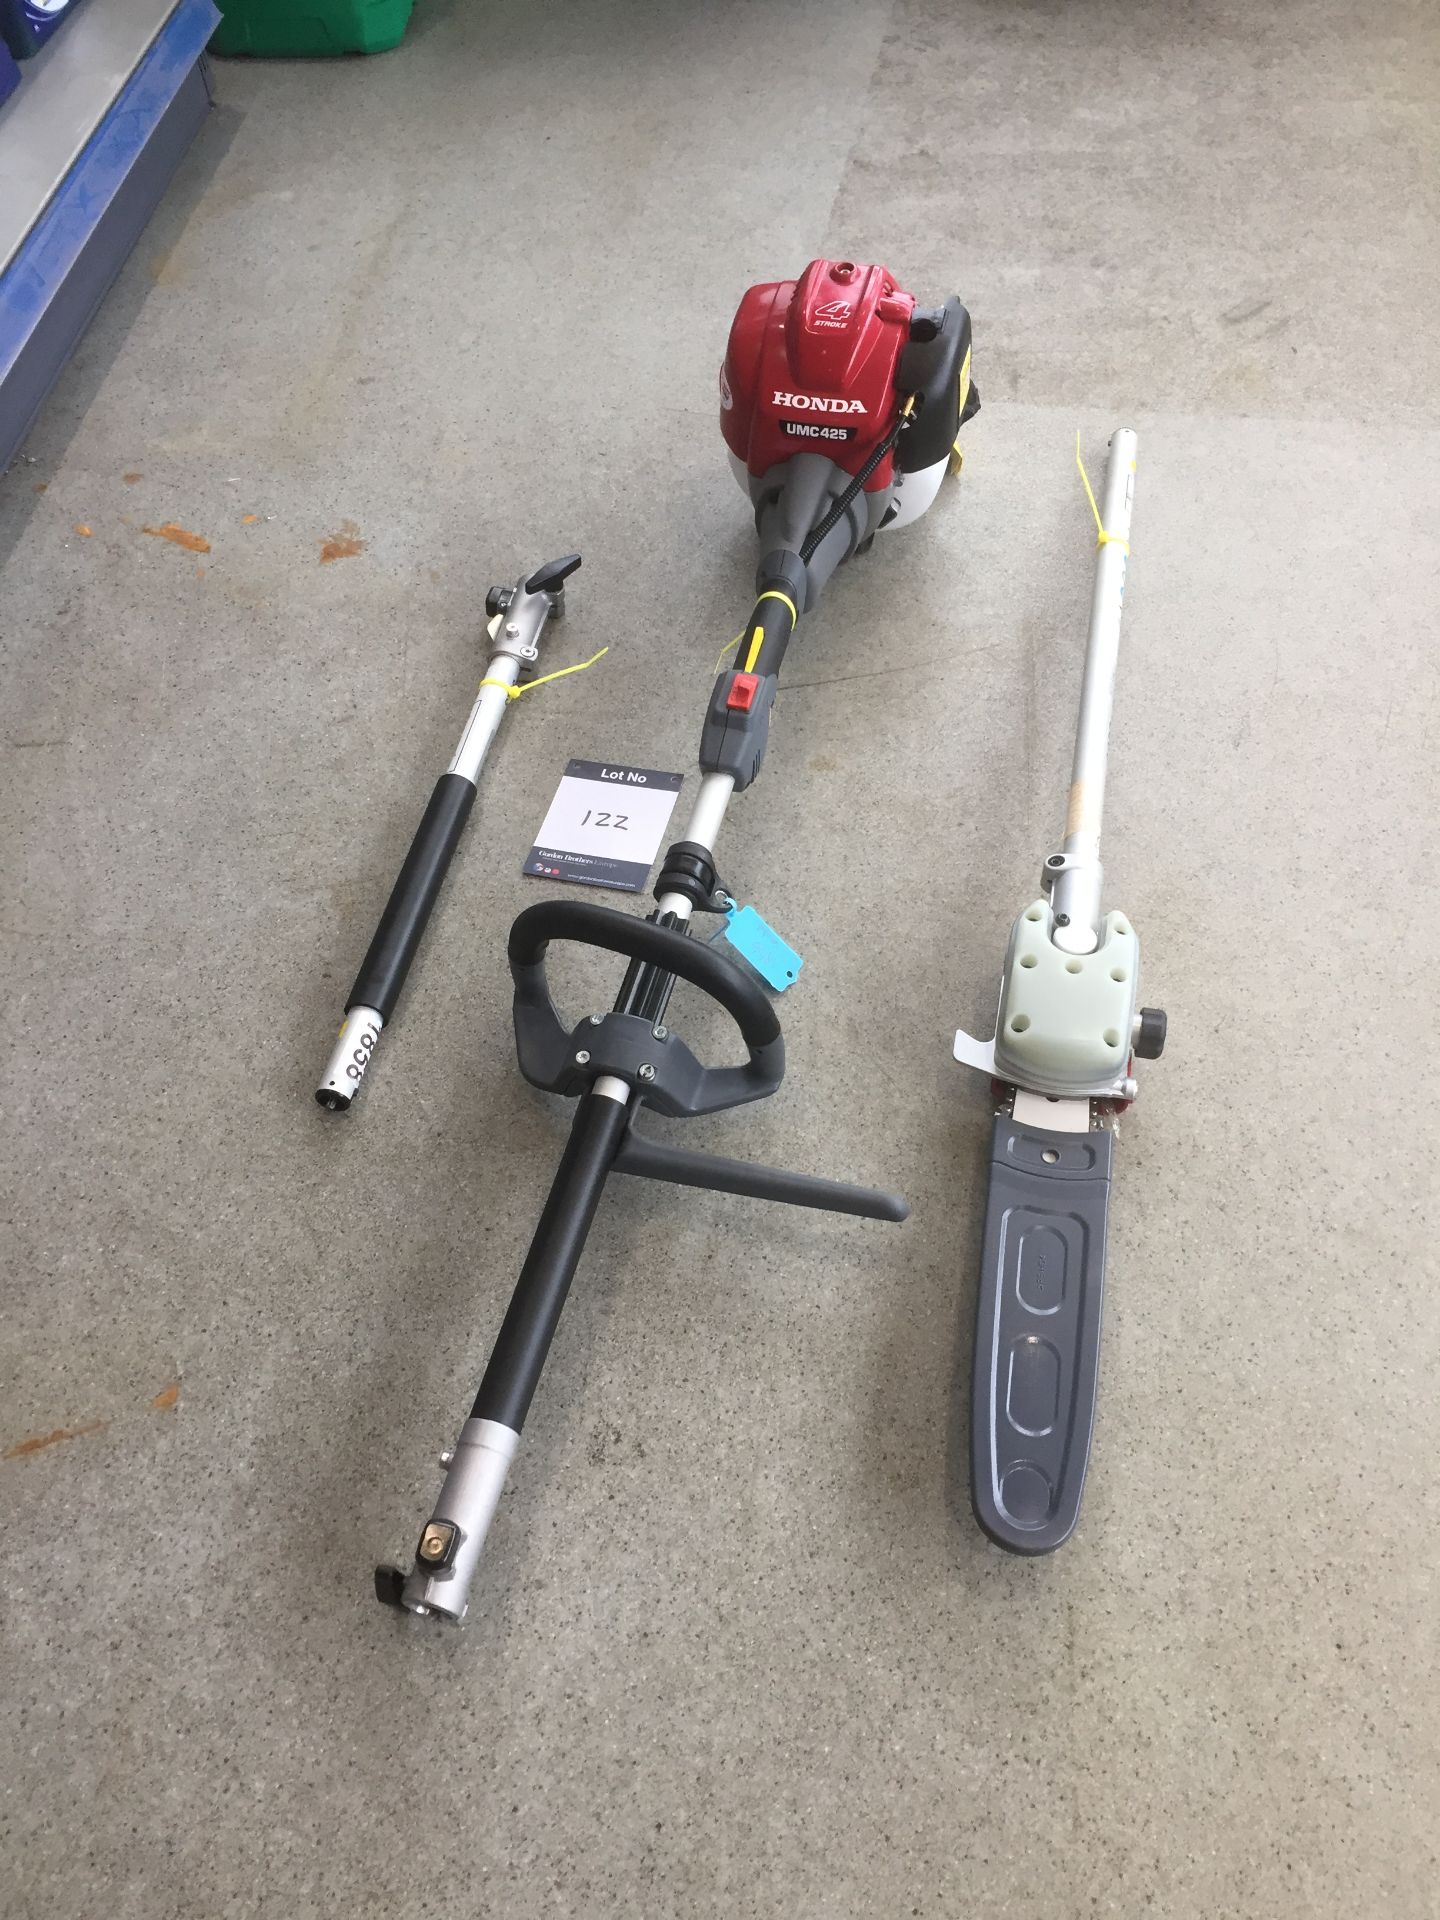 Honda UMC 425 petrol 2 section strimmer with hedge trimmer attachment (unused), (2015)